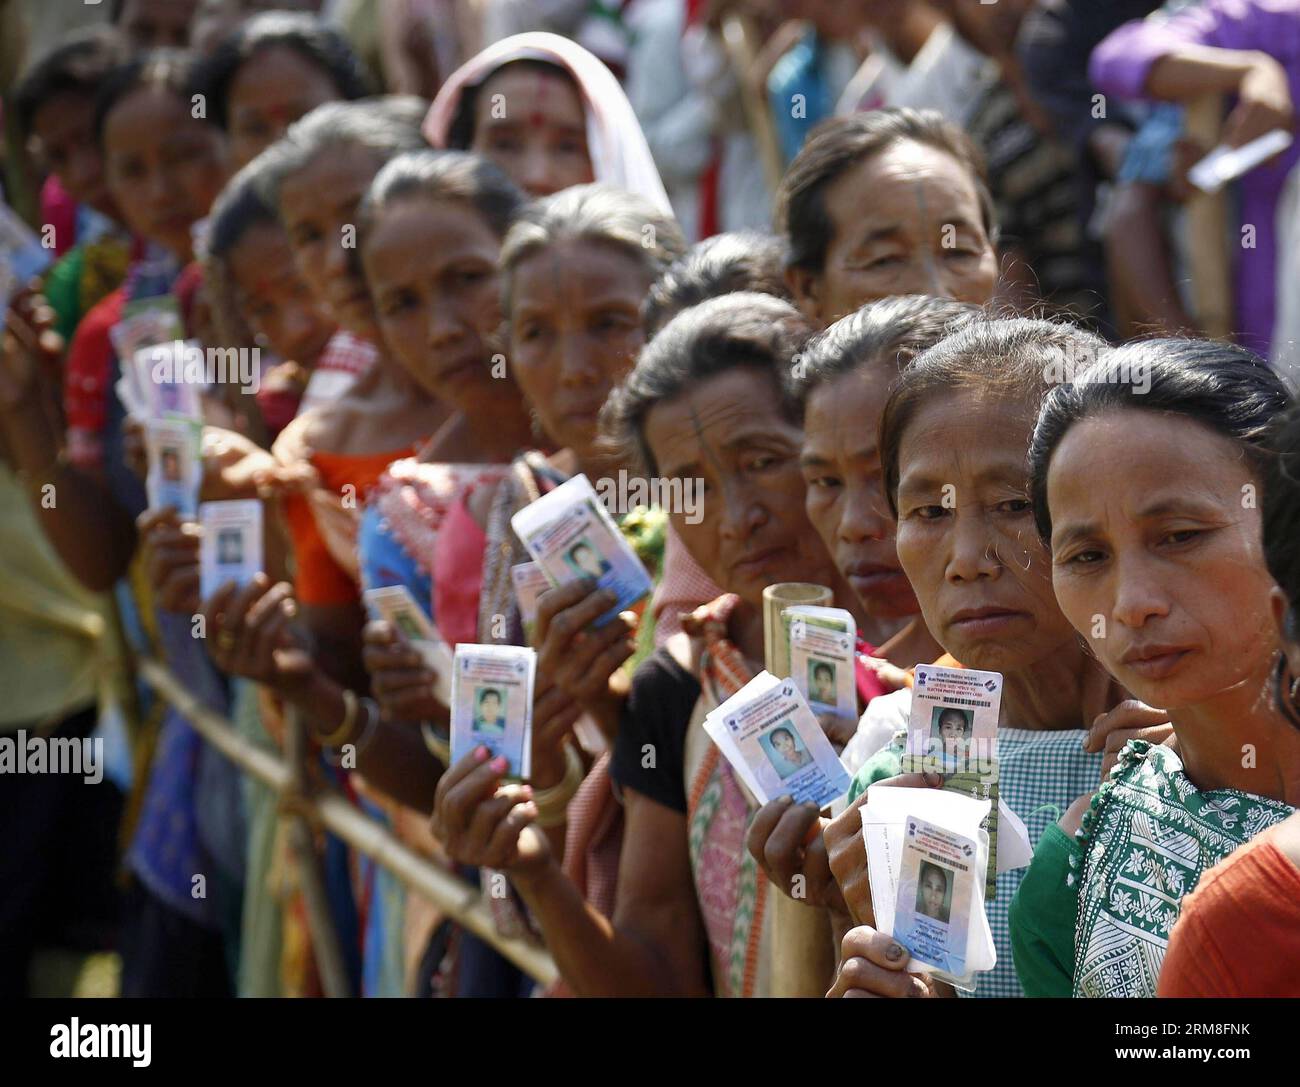 (140412) -- DIPHU, April 12, 2014 (Xinhua) -- People wait in queue and show their voter identity cards at a polling booth in Diphu, in the northeastern Indian state of Assam, April 12, 2014. The multi-phase voting across the country runs until May 12, with results for the 543-seat lower house of parliament to be announced on May 16. (Xinhua/Stringer) INDIA-DIPHU-ELECTION PUBLICATIONxNOTxINxCHN   April 12 2014 XINHUA Celebrities Wait in Queue and Show their Voter Identity Cards AT a Polling Booth in  in The Northeastern Indian State of Assam April 12 2014 The Multi Phase Voting across The Count Stock Photo